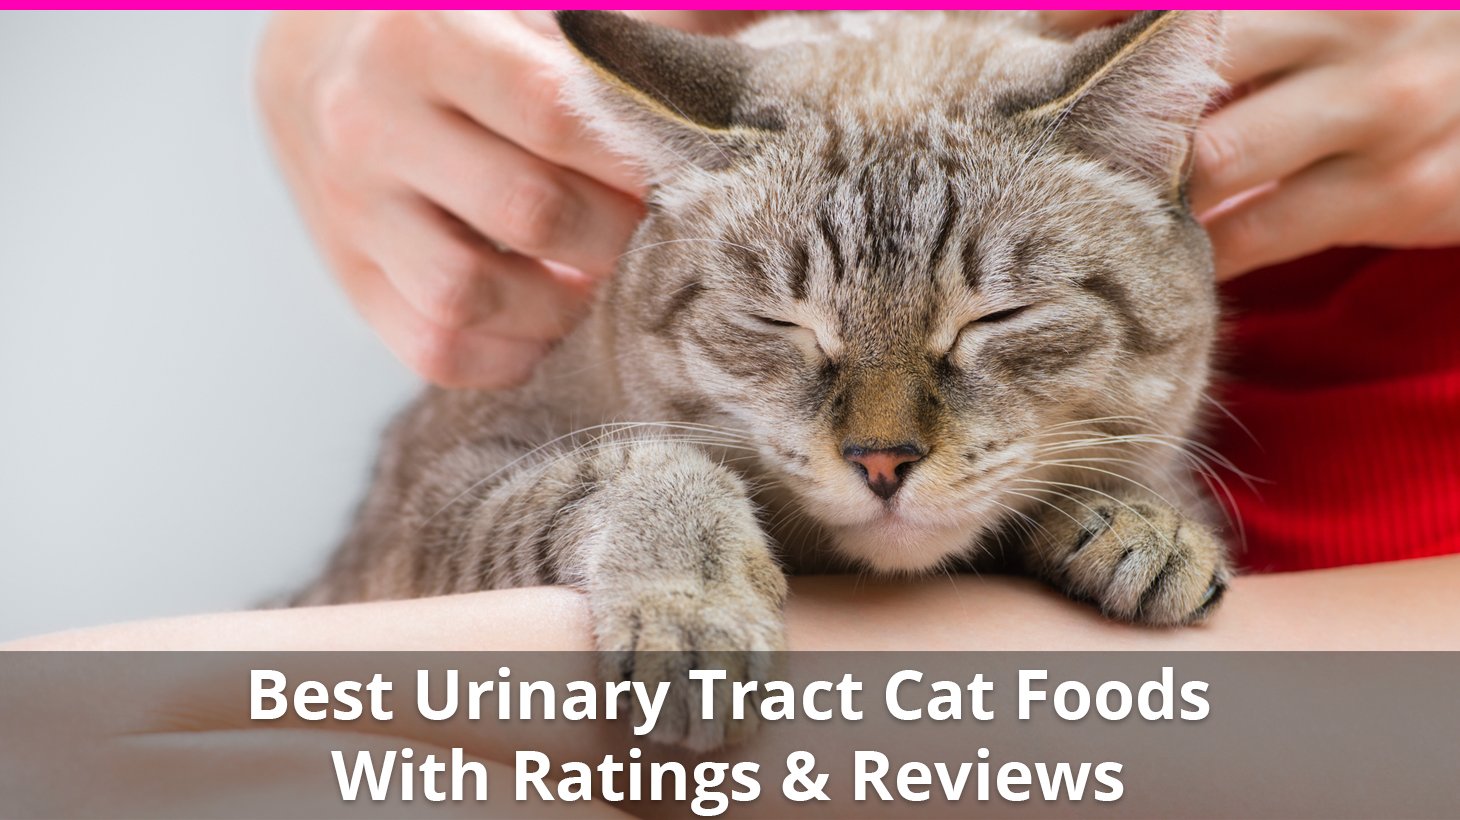 Best Cat Food for Urinary Tract Health 